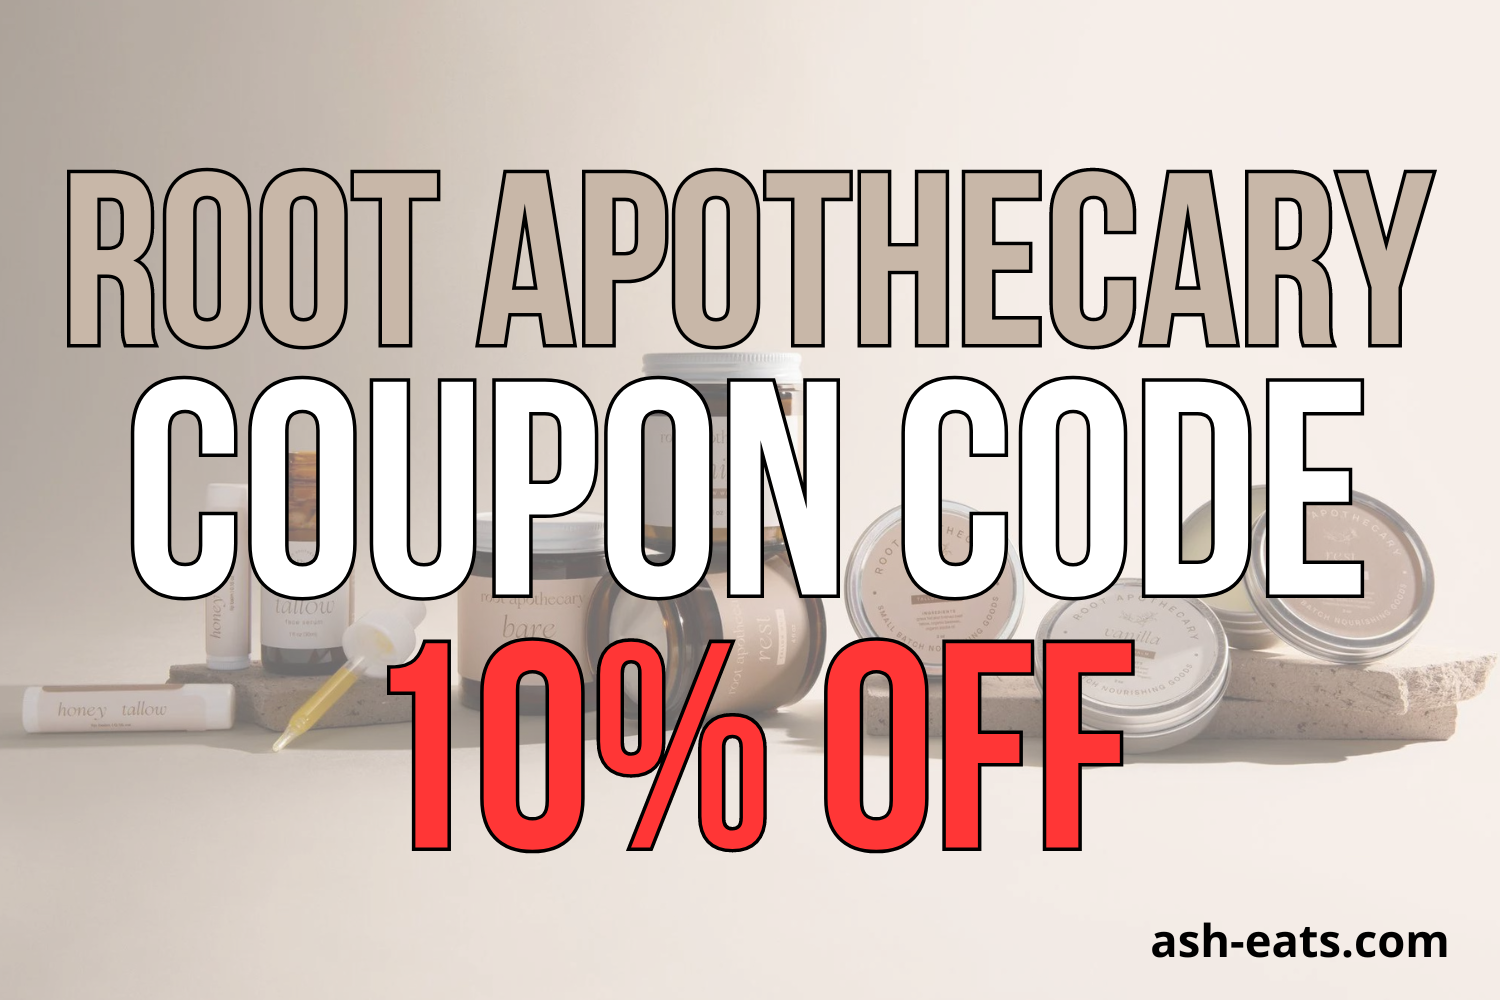 root apothecary coupon code